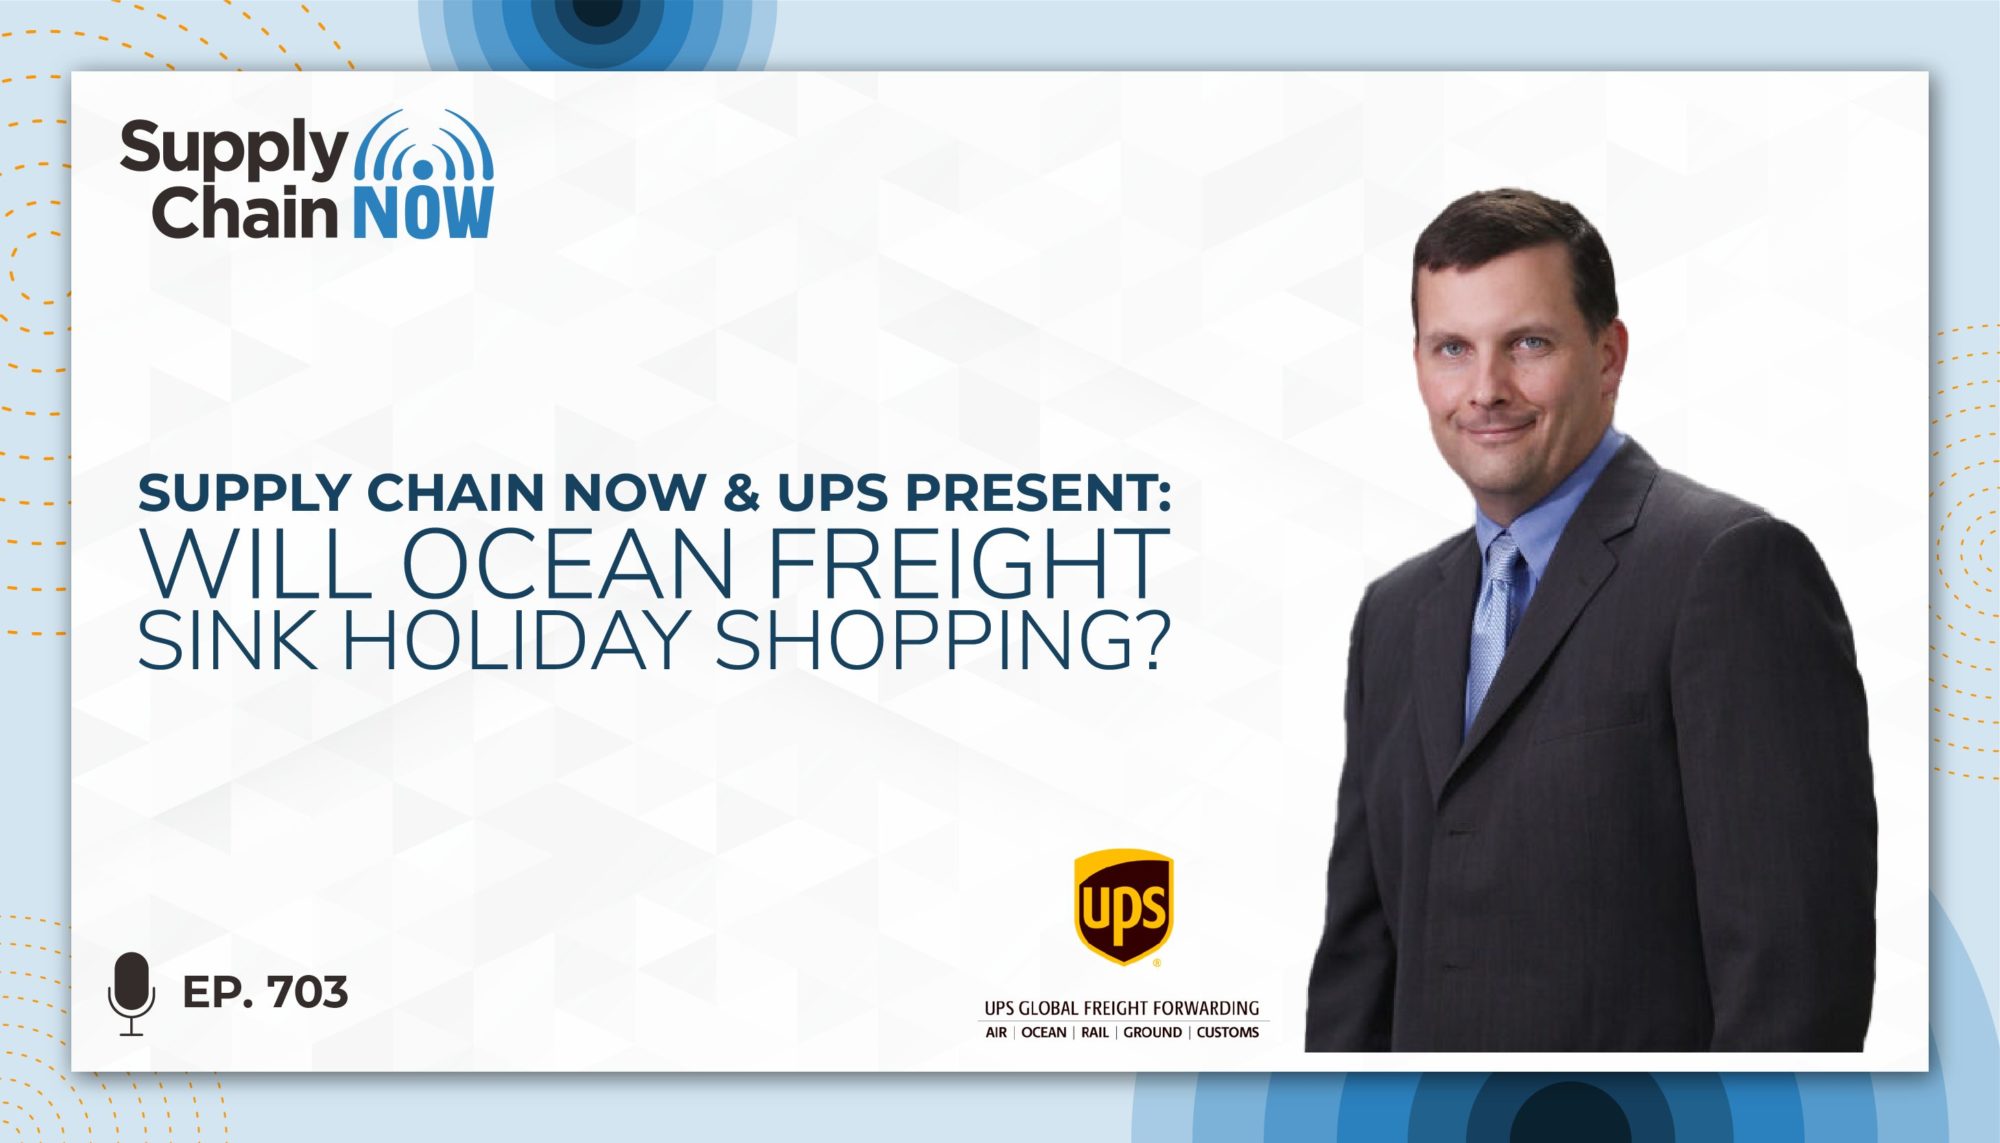 Will Ocean Freight Sink Holiday Shopping? By Supply Chain Now and UPS